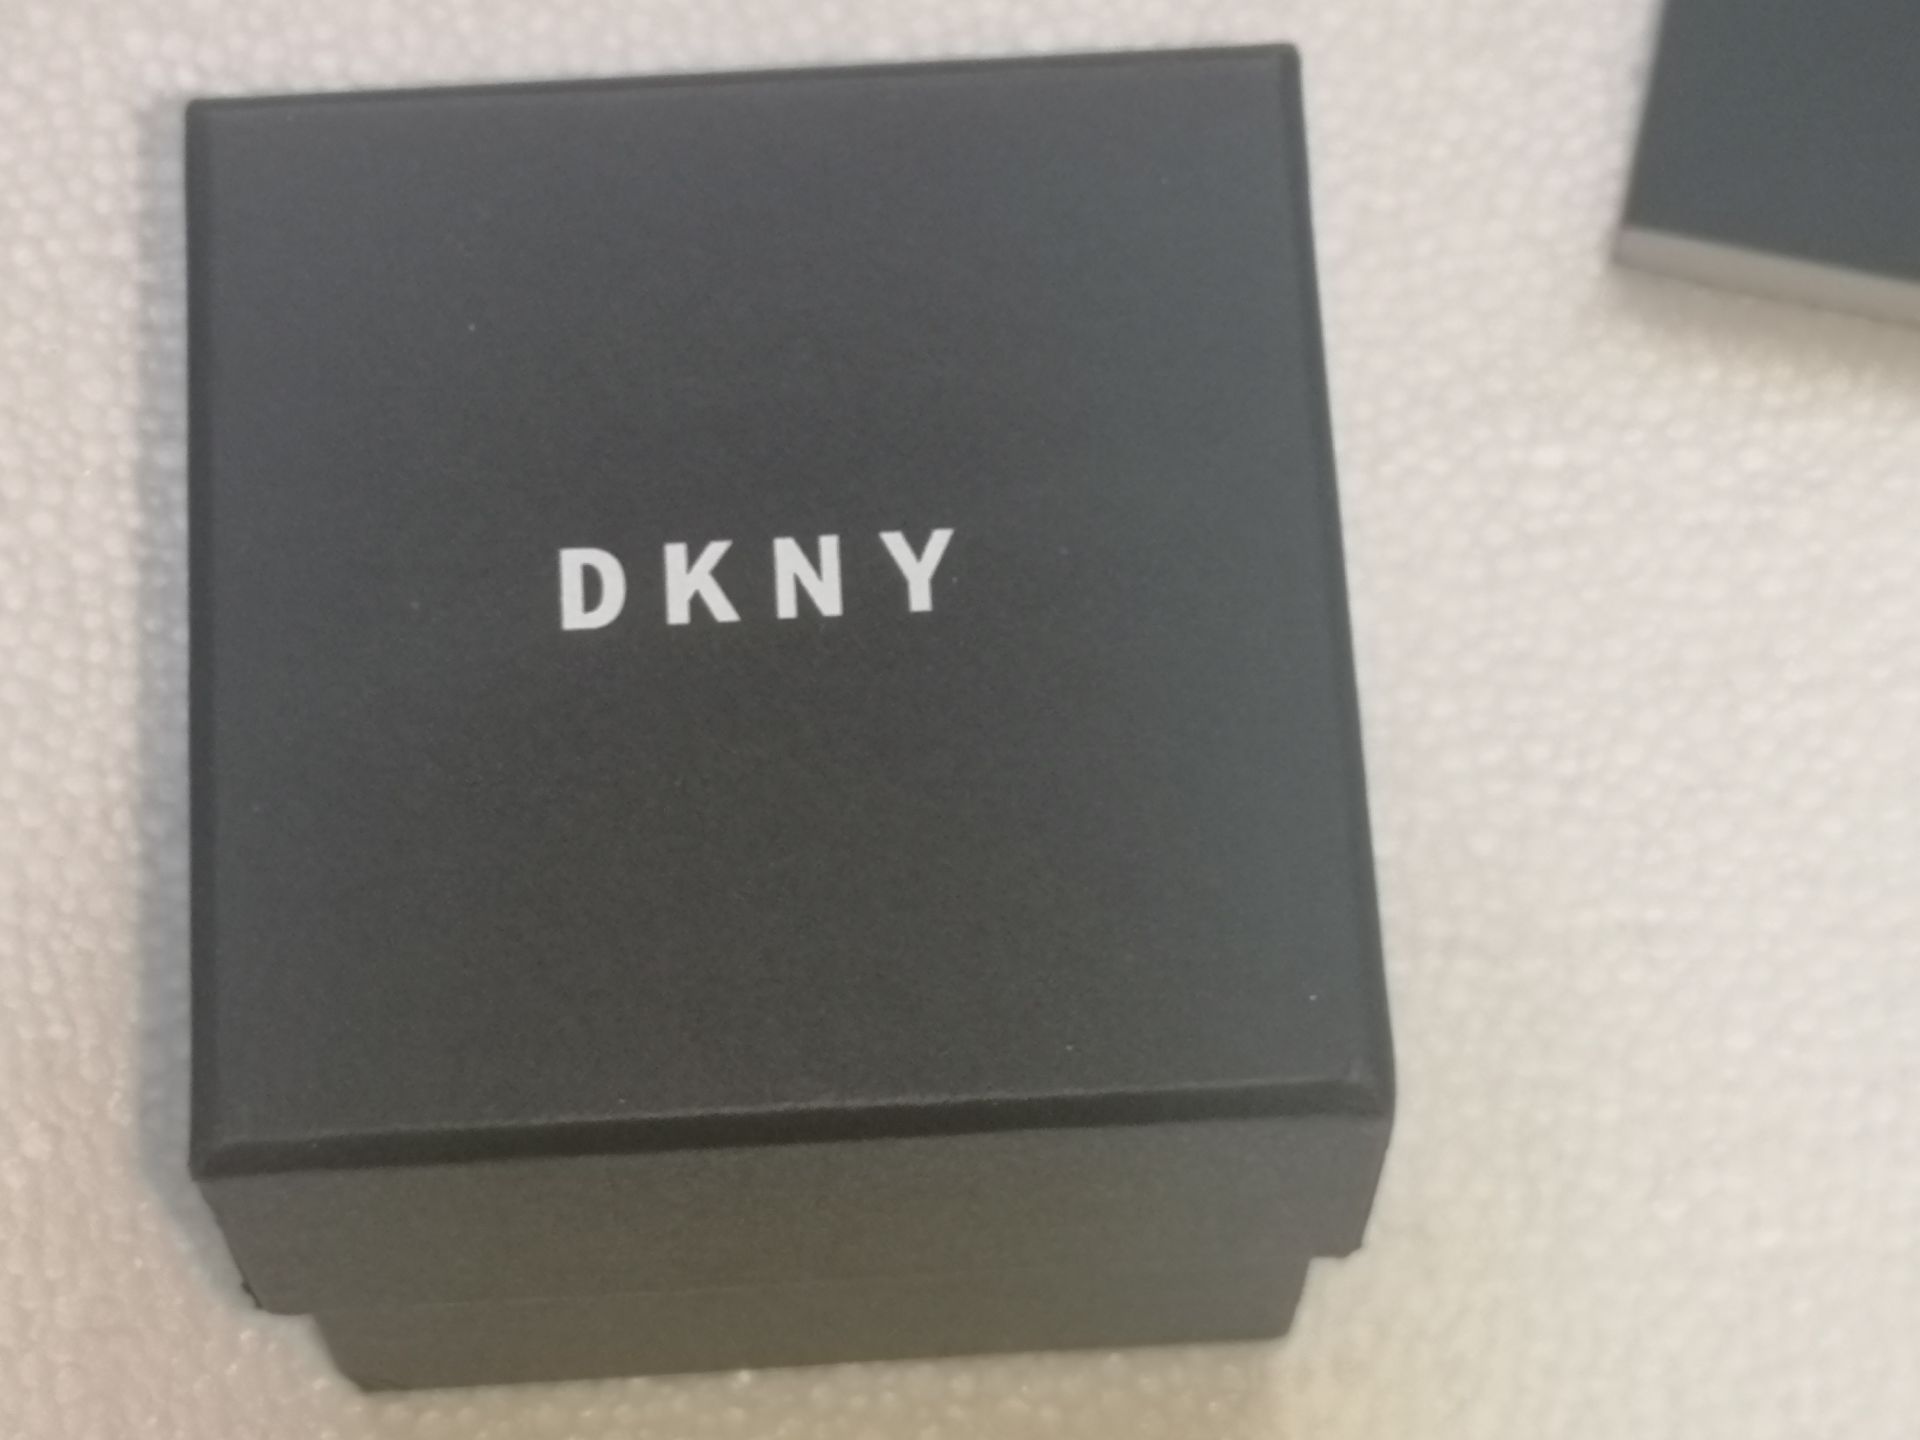 Dkny Womens Analogue Quartz Watch With Stainless Steel Strap Ny2393 - Image 8 of 8